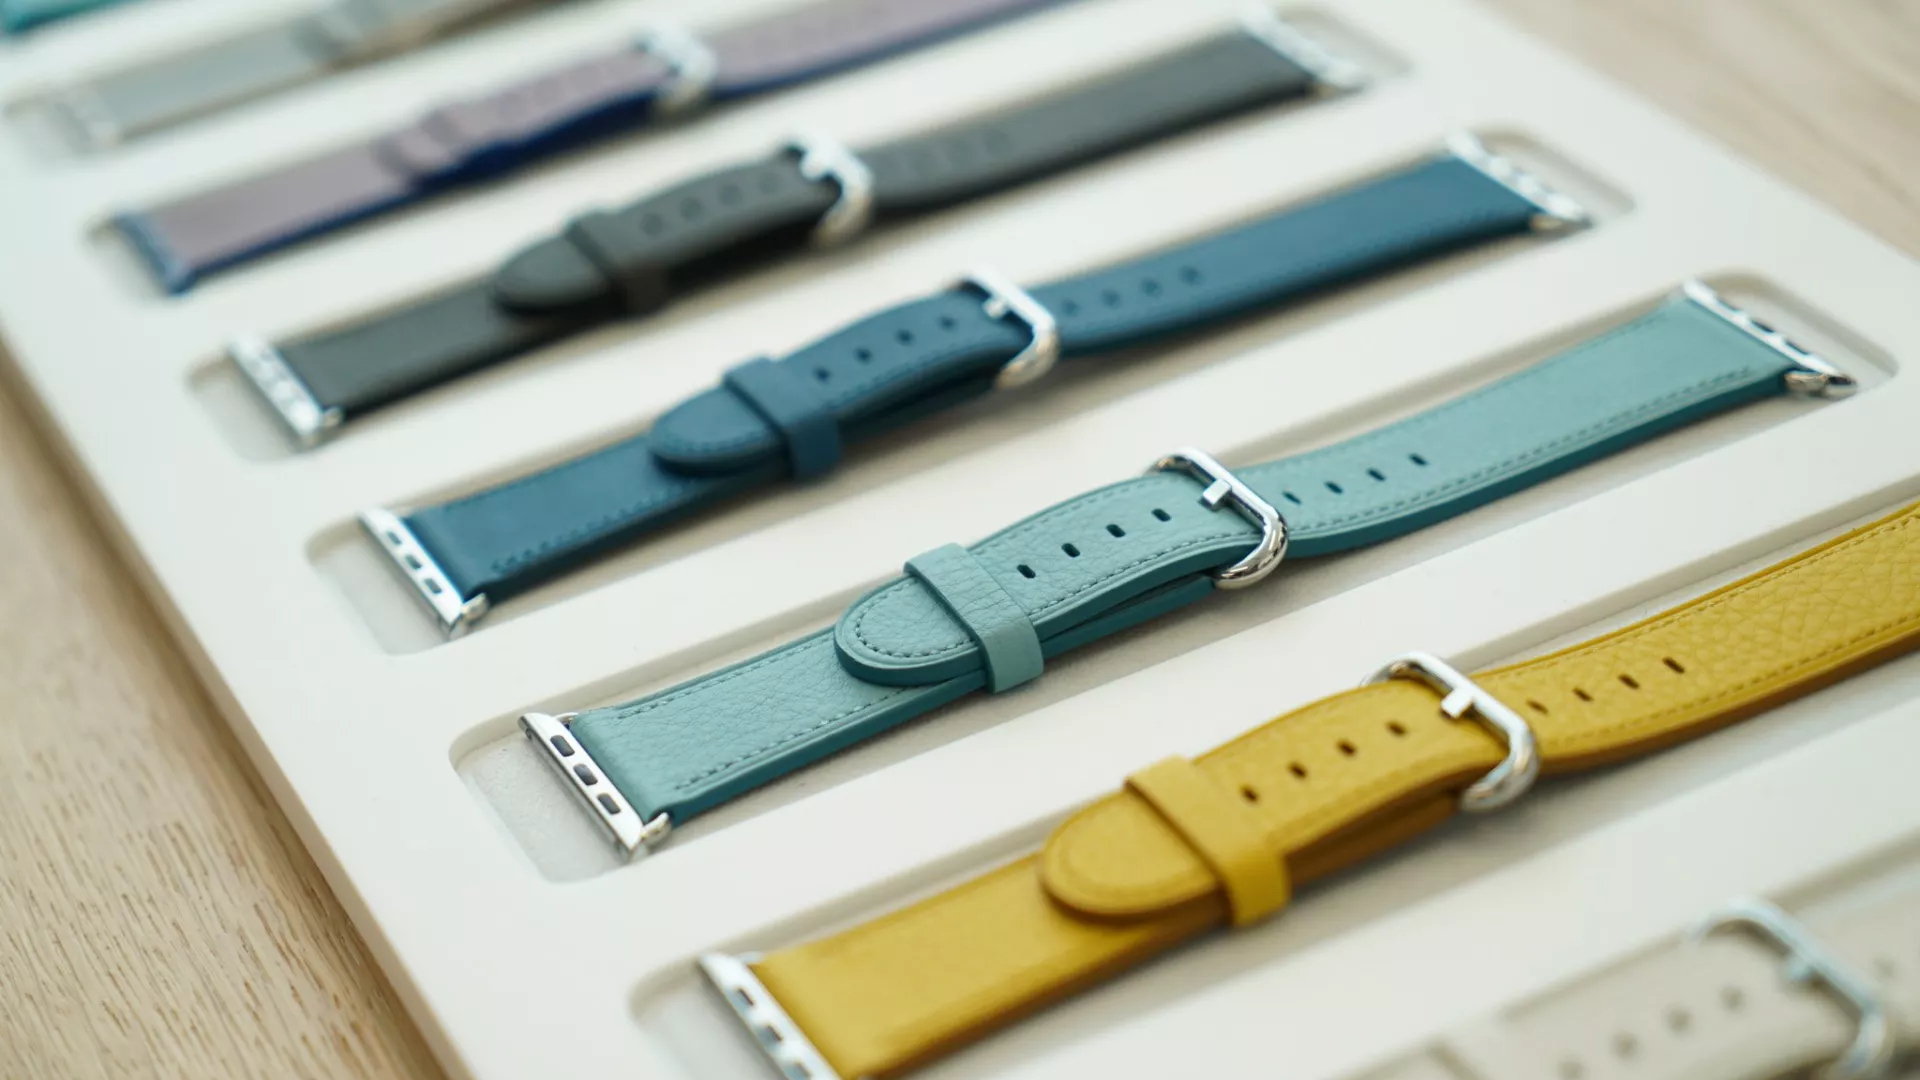 These silicone Apple Watch bands are perfect for adventure-seekers